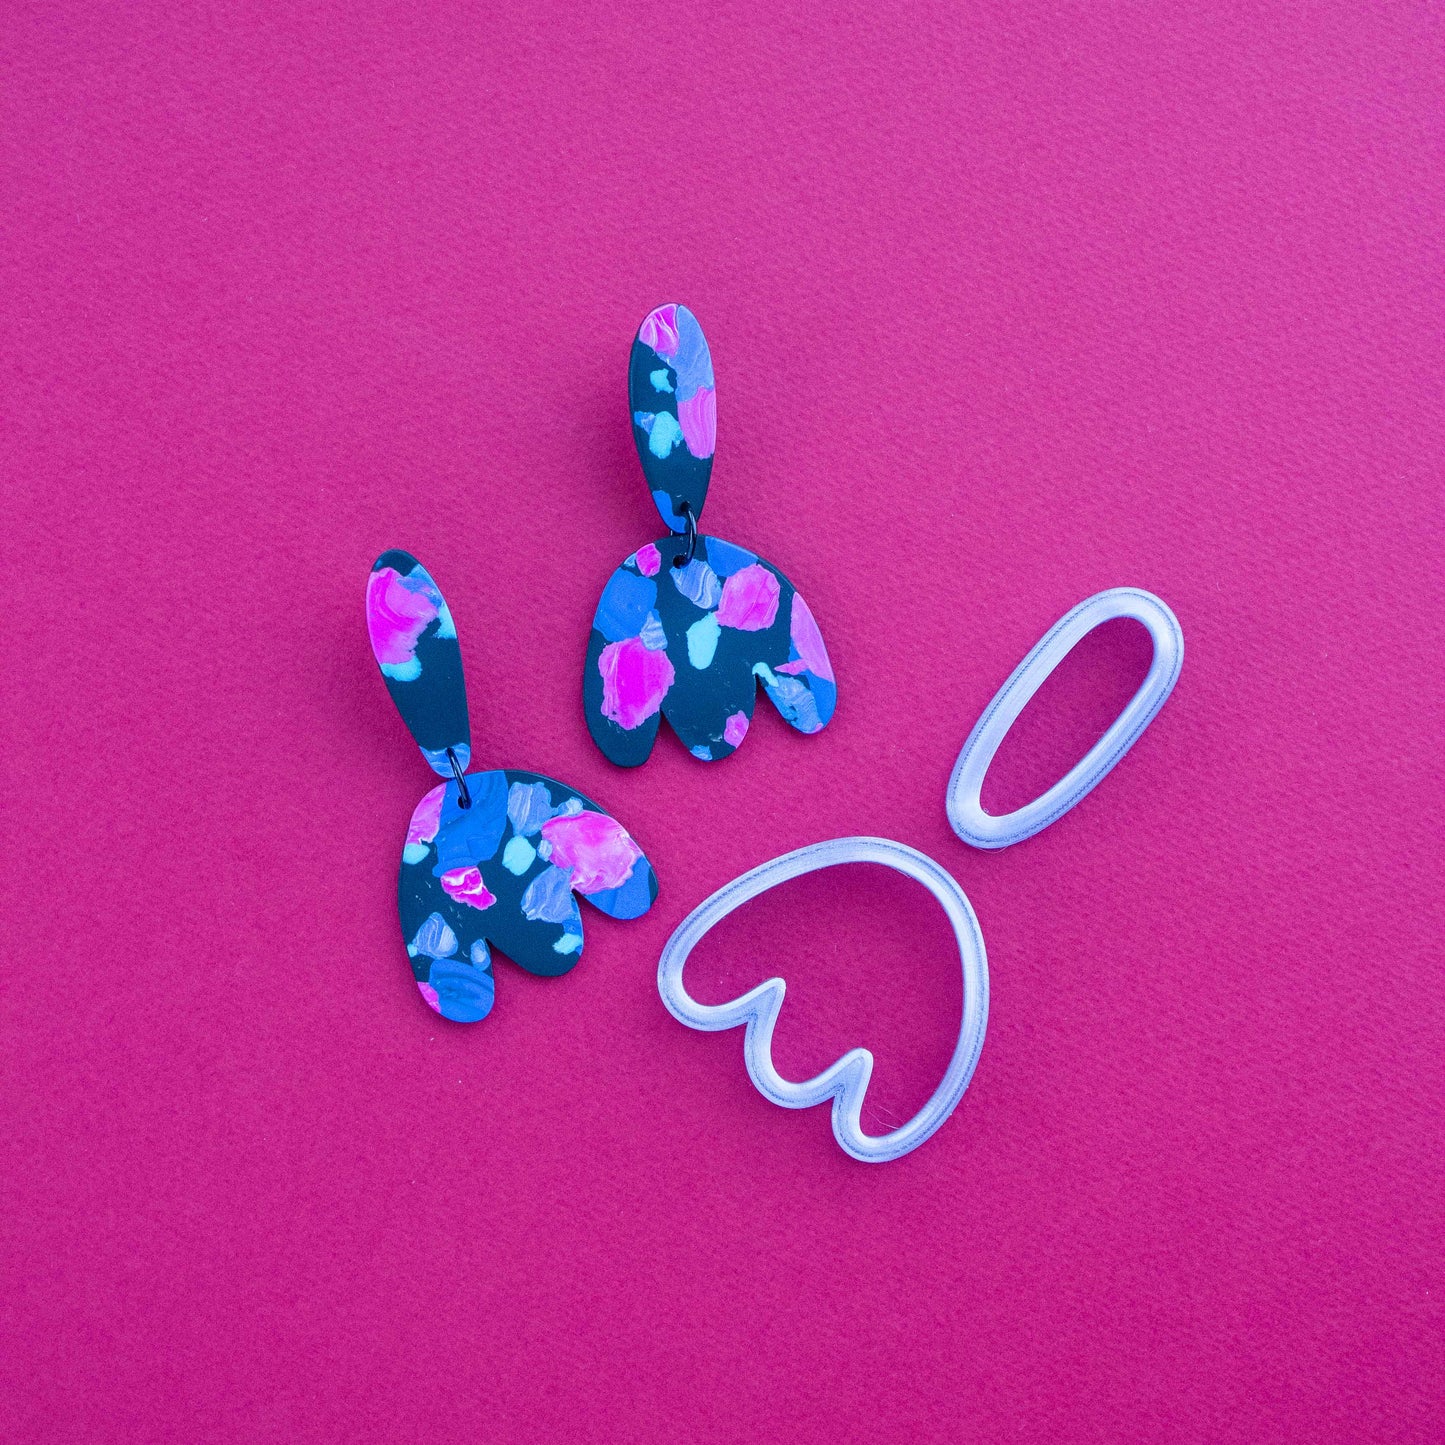 2 earring sets and one abstract flower polymer cutter on a pink background.